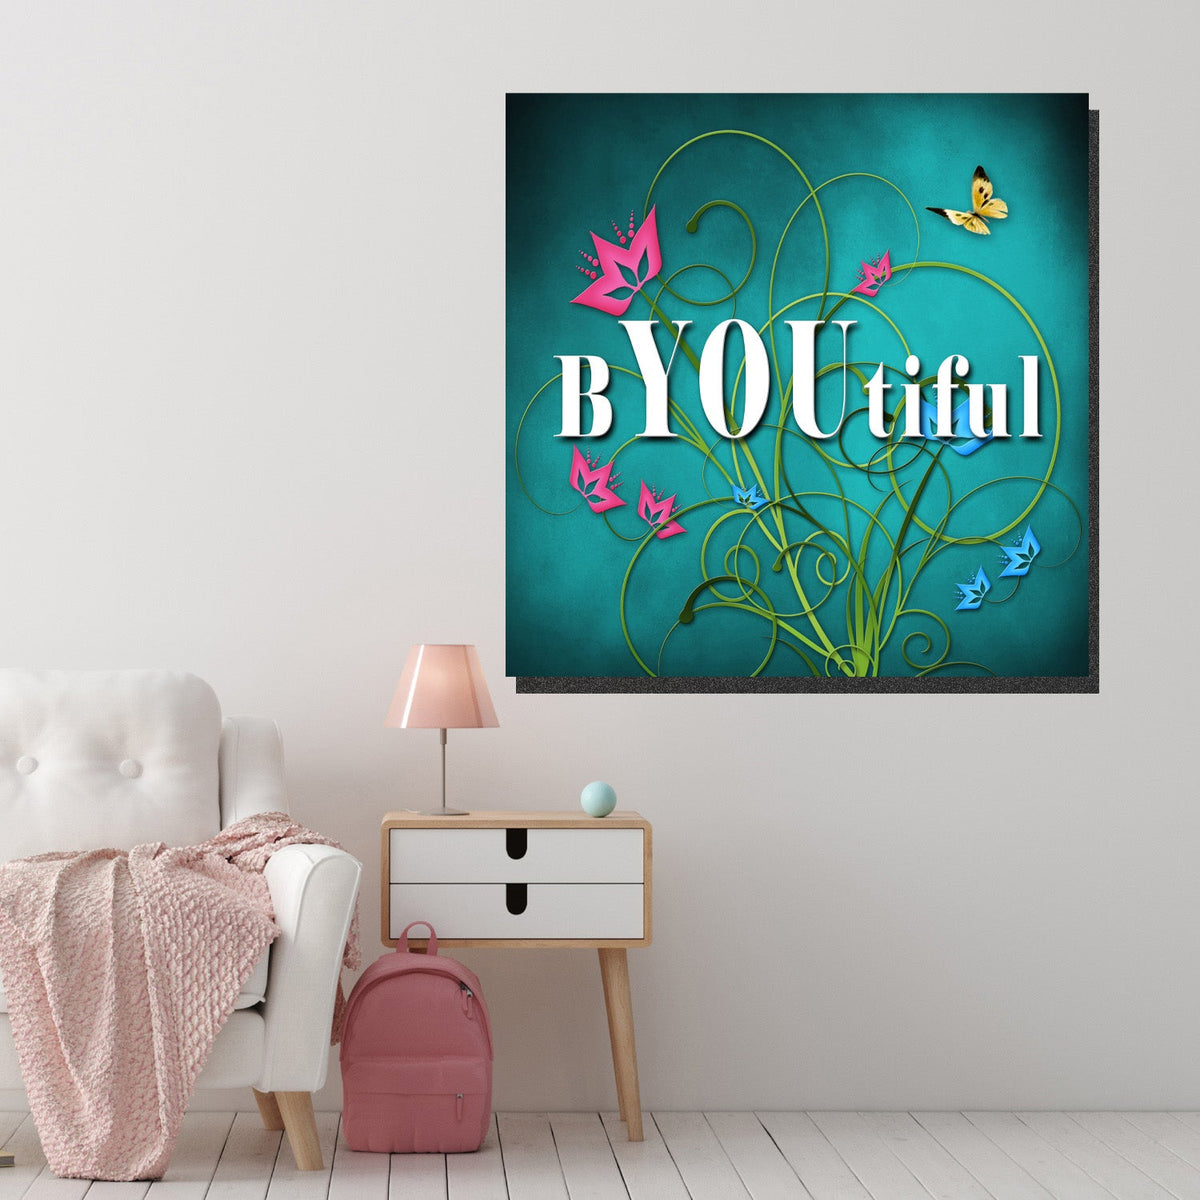 https://cdn.shopify.com/s/files/1/0387/9986/8044/products/BYOUtifulCanvasArtprintStretched-1.jpg